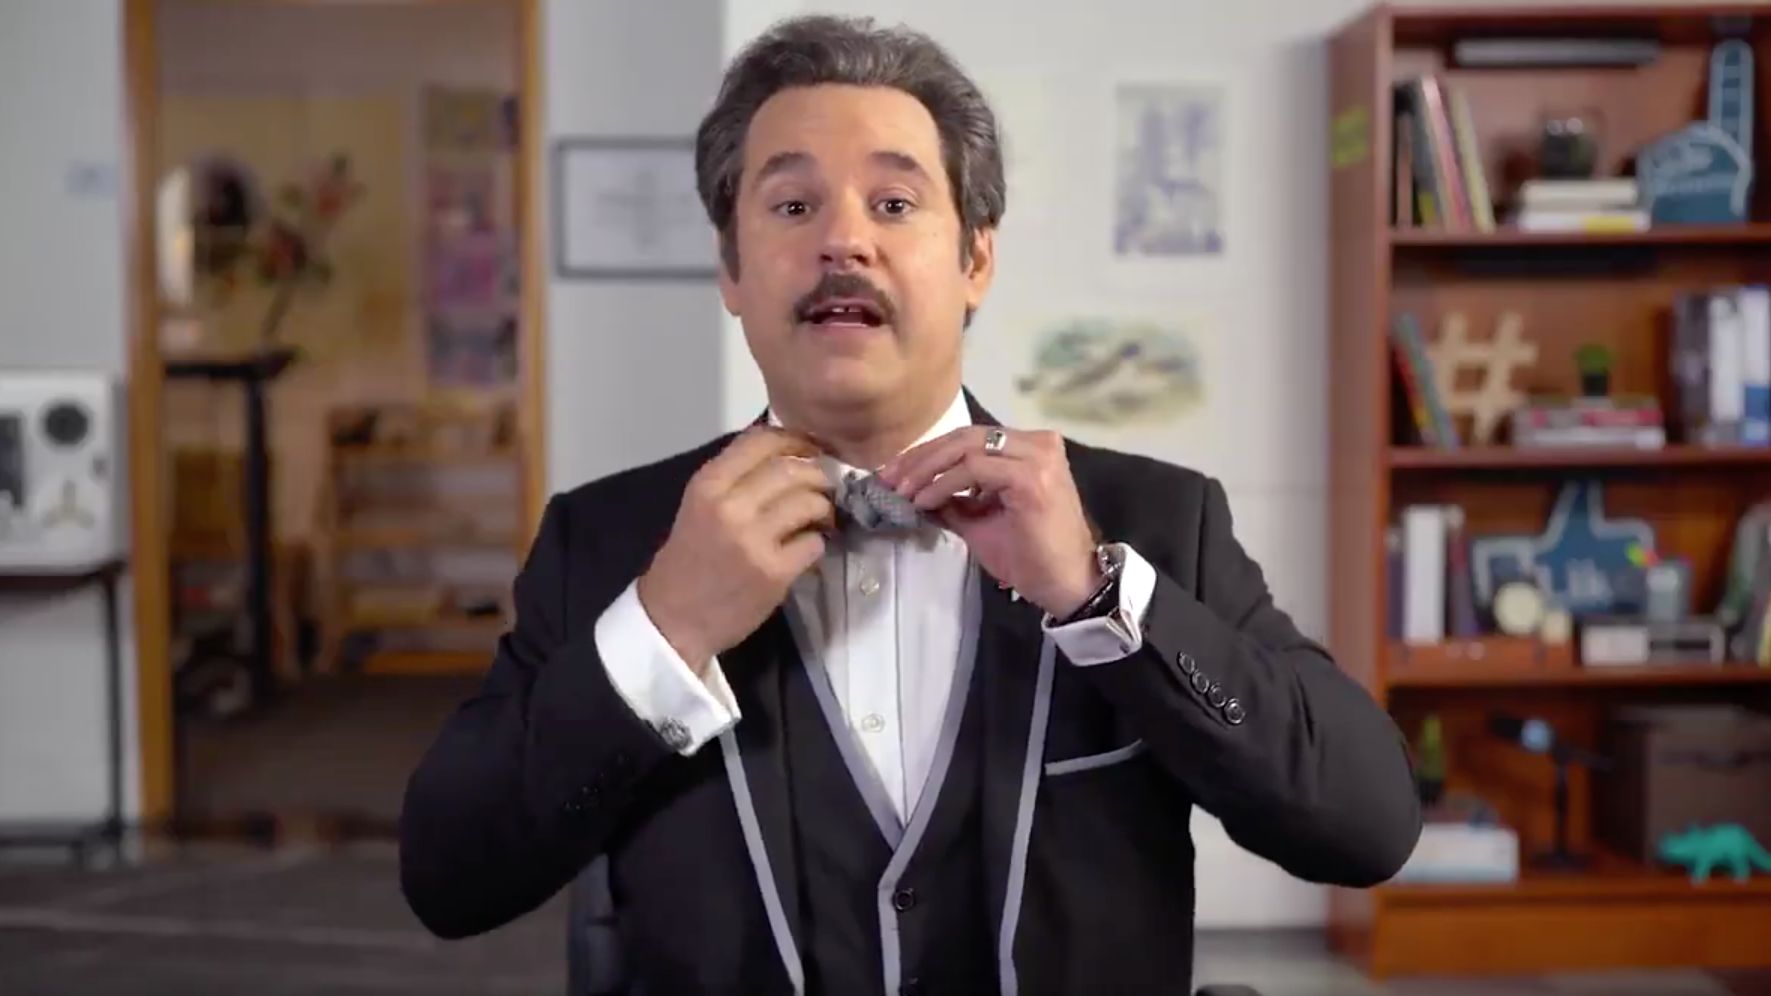 How To Tie A Bow Tie, According To Paul F. Tompkins